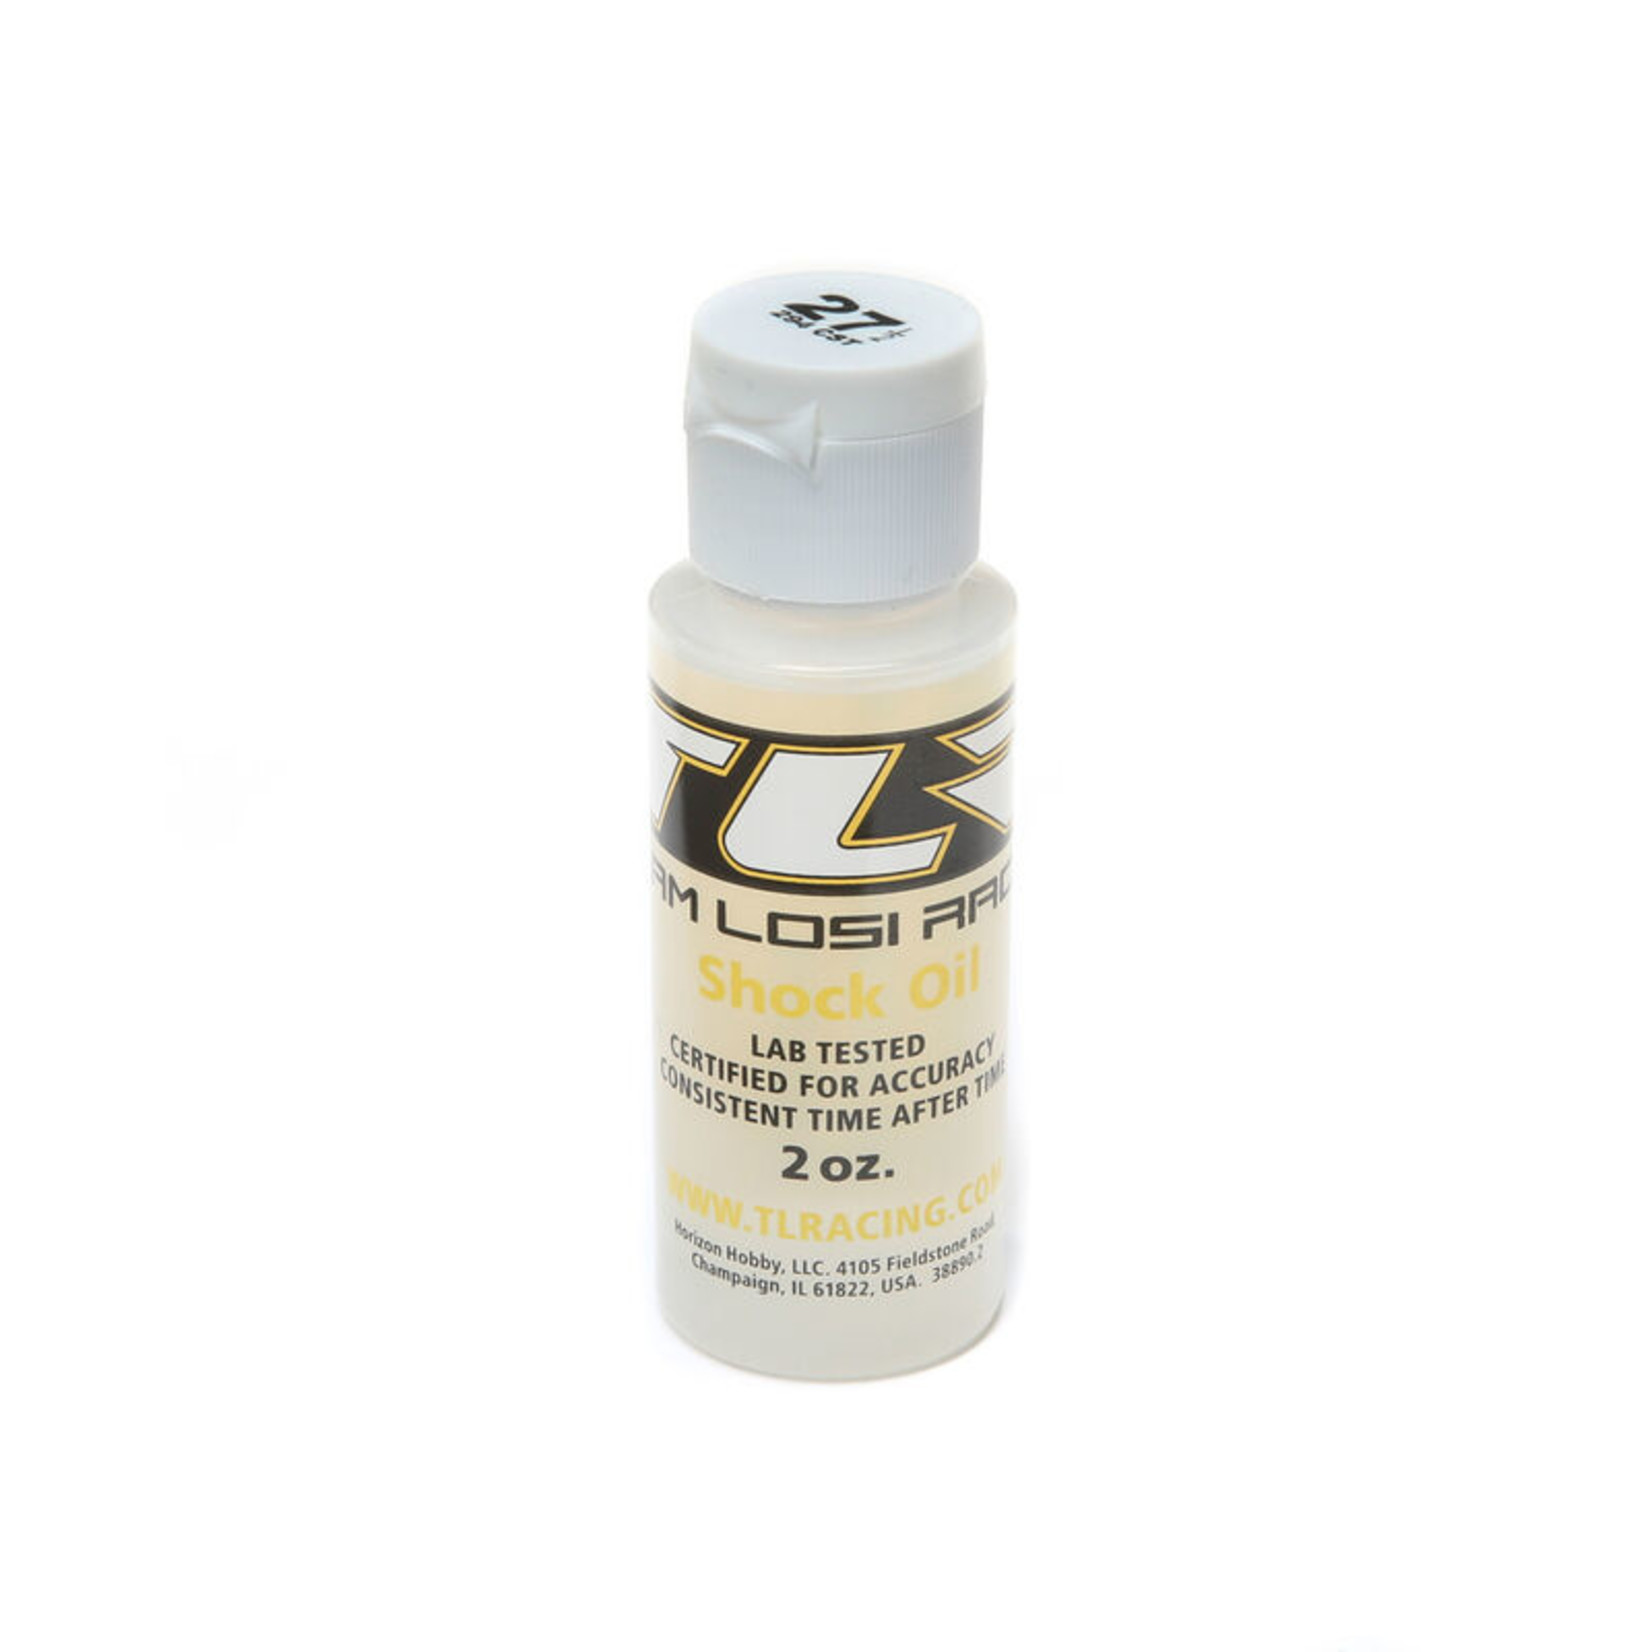 TLR TLR74005  SILICONE SHOCK OIL, 27.5WT, 294CST, 2OZ